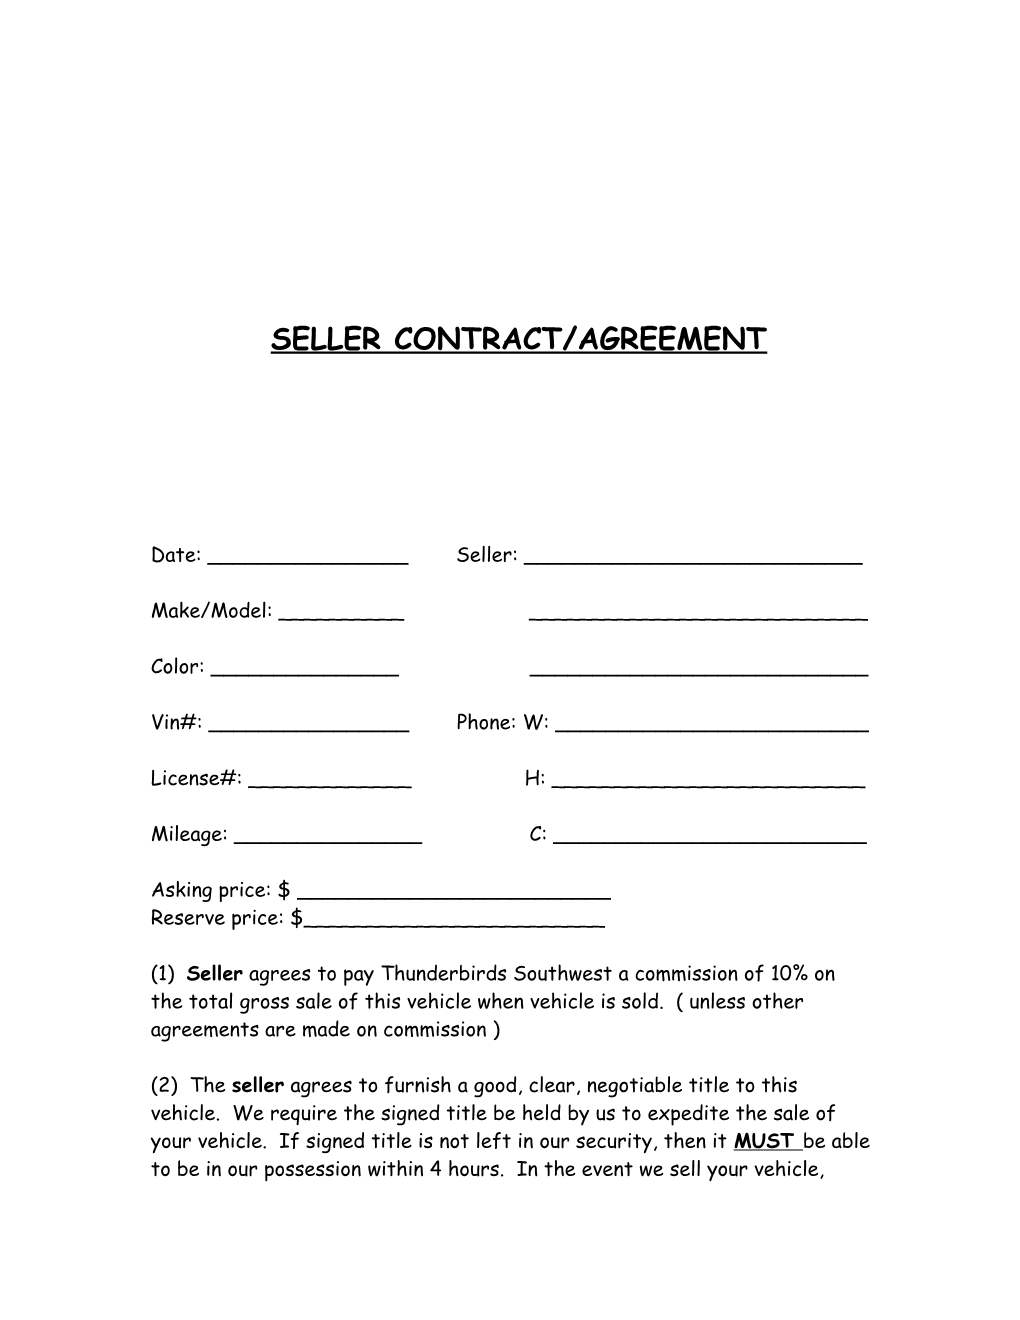 Seller Contract/Agreement